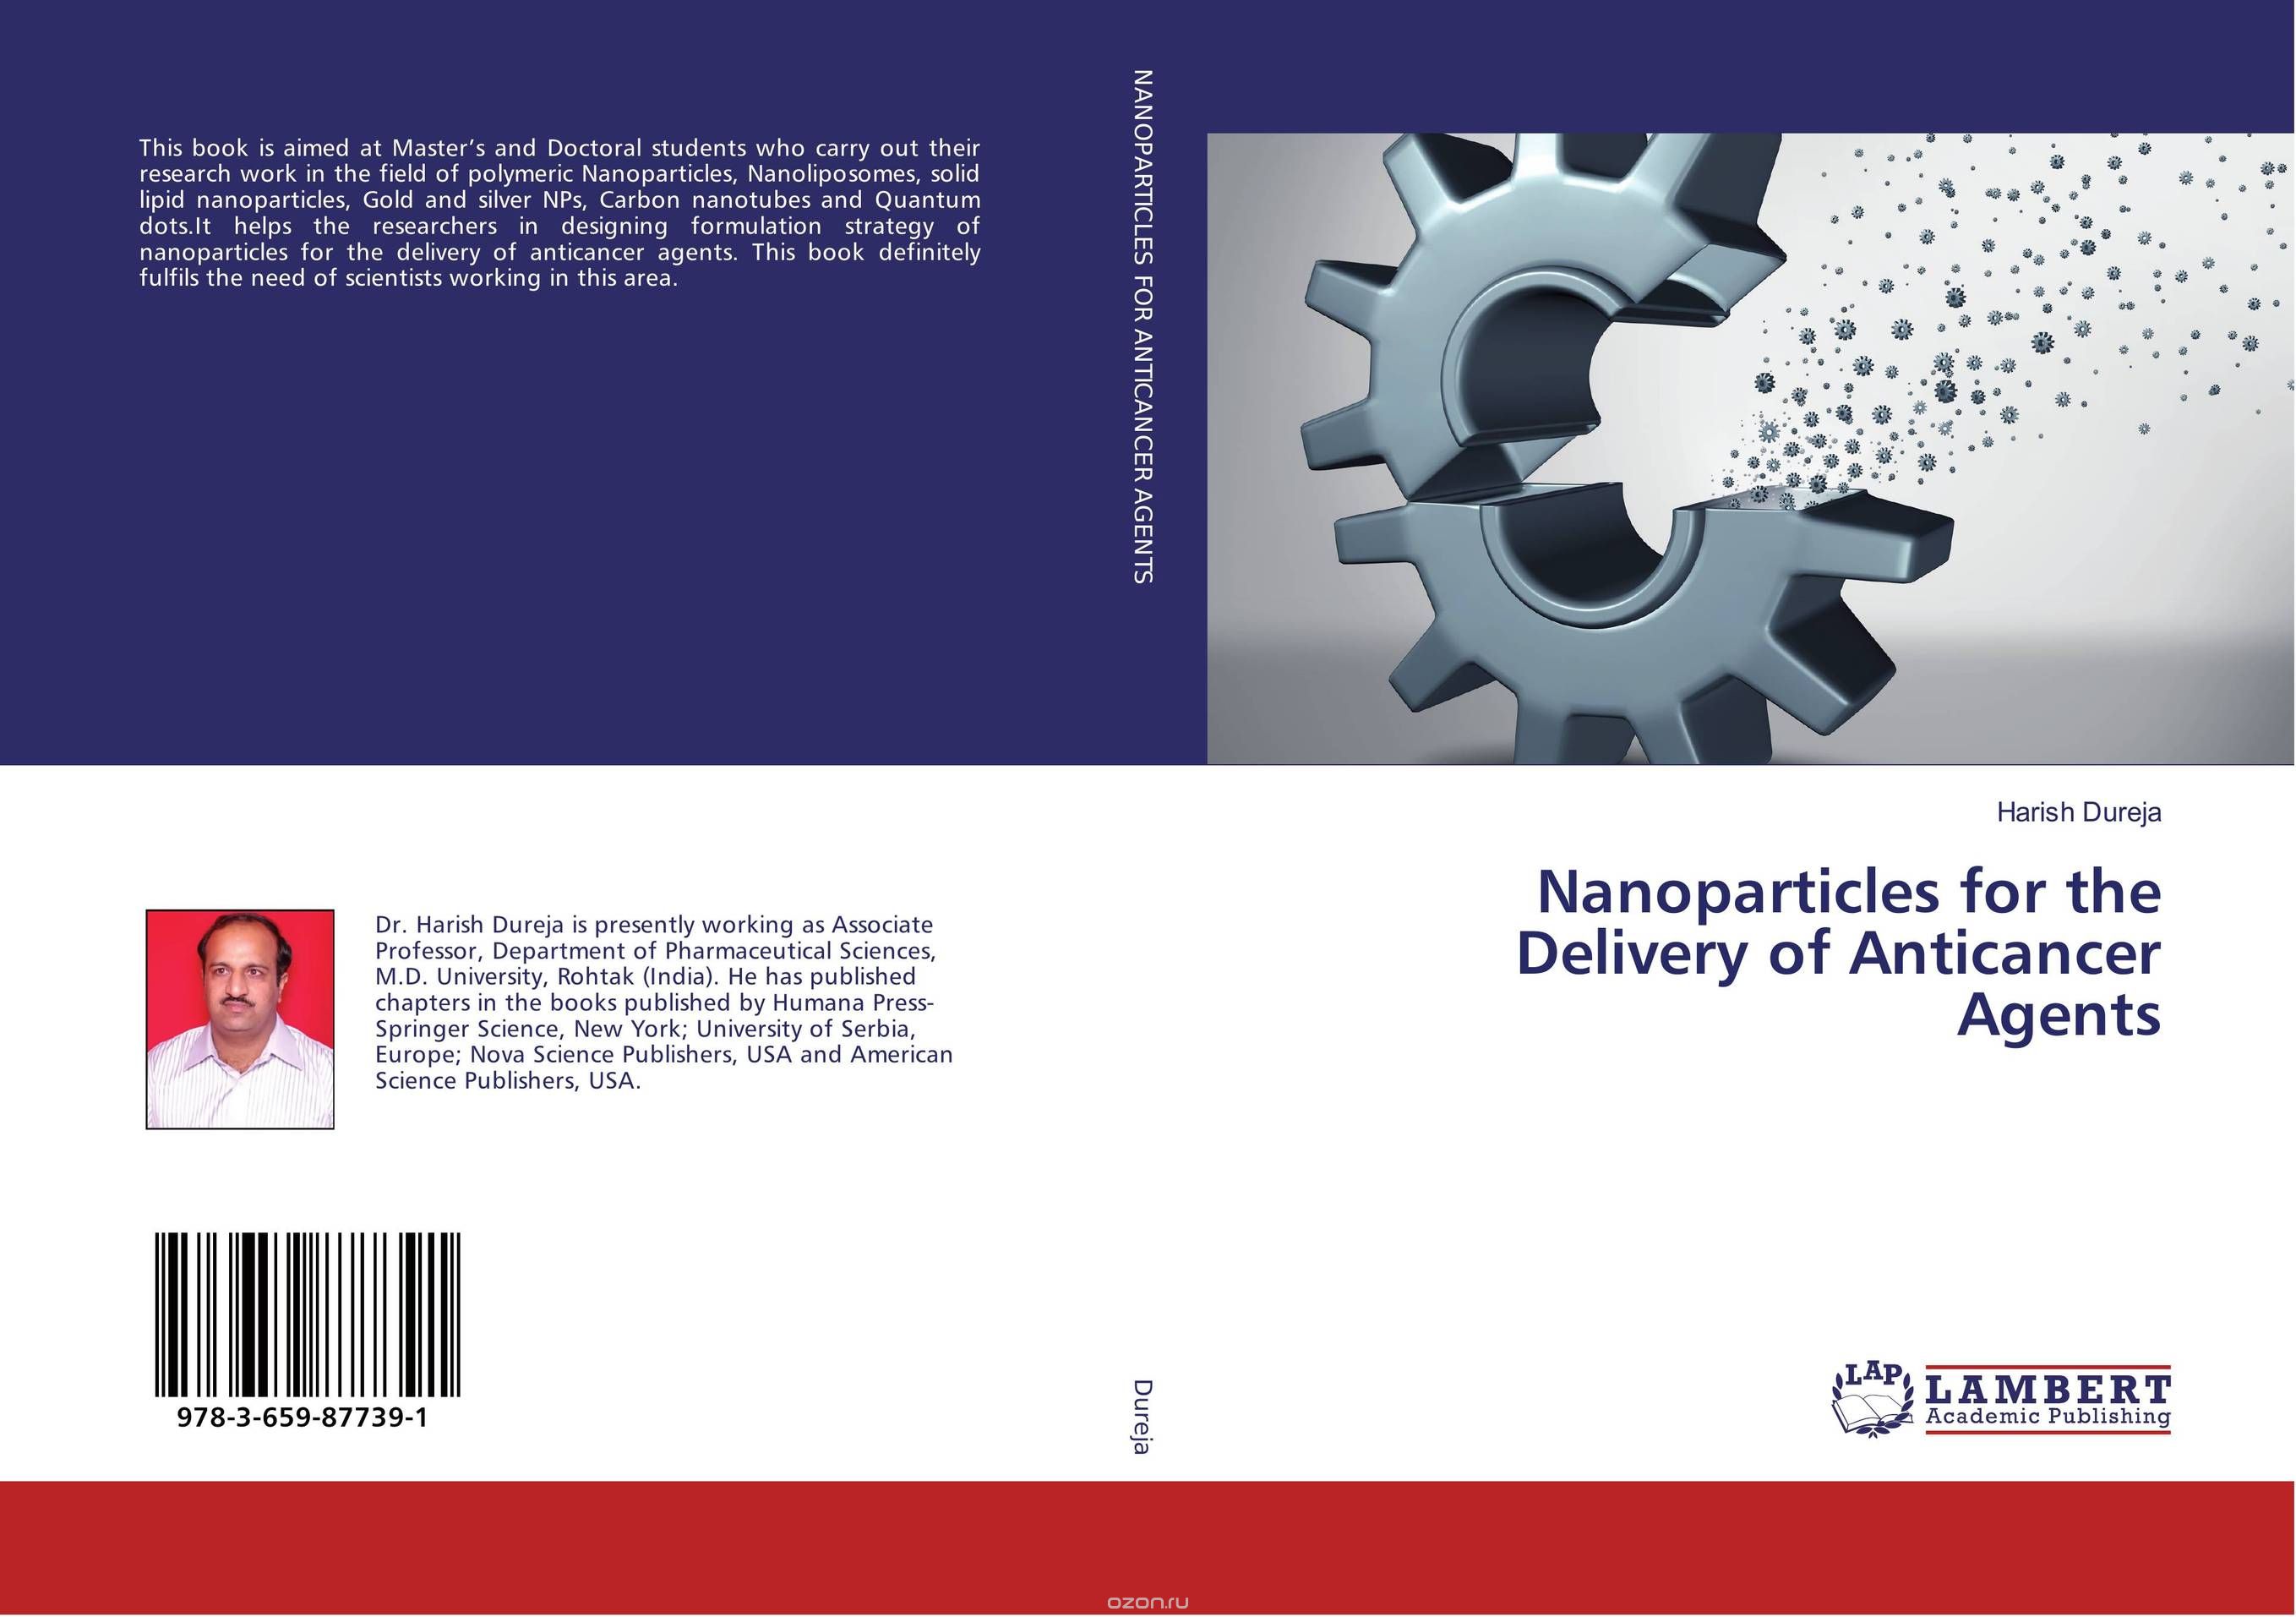 Скачать книгу "Nanoparticles for the Delivery of Anticancer Agents"